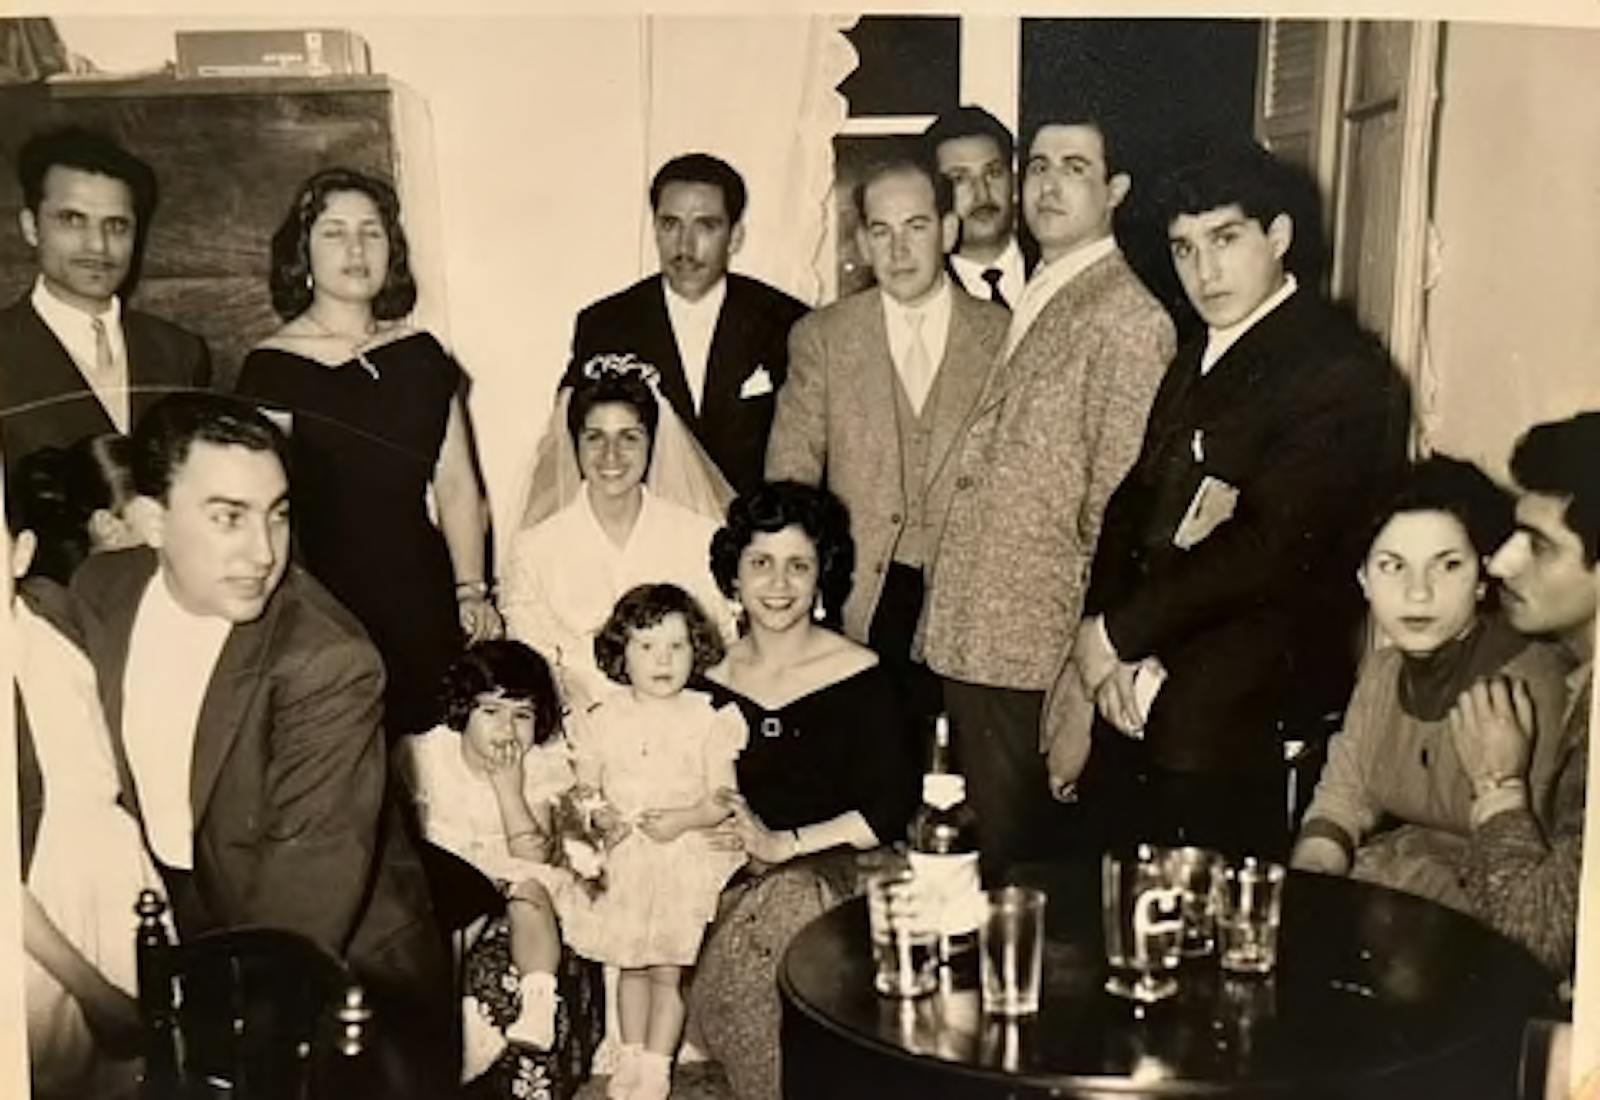 Simone (center in white dress) at a wedding in Morocco, 1957.